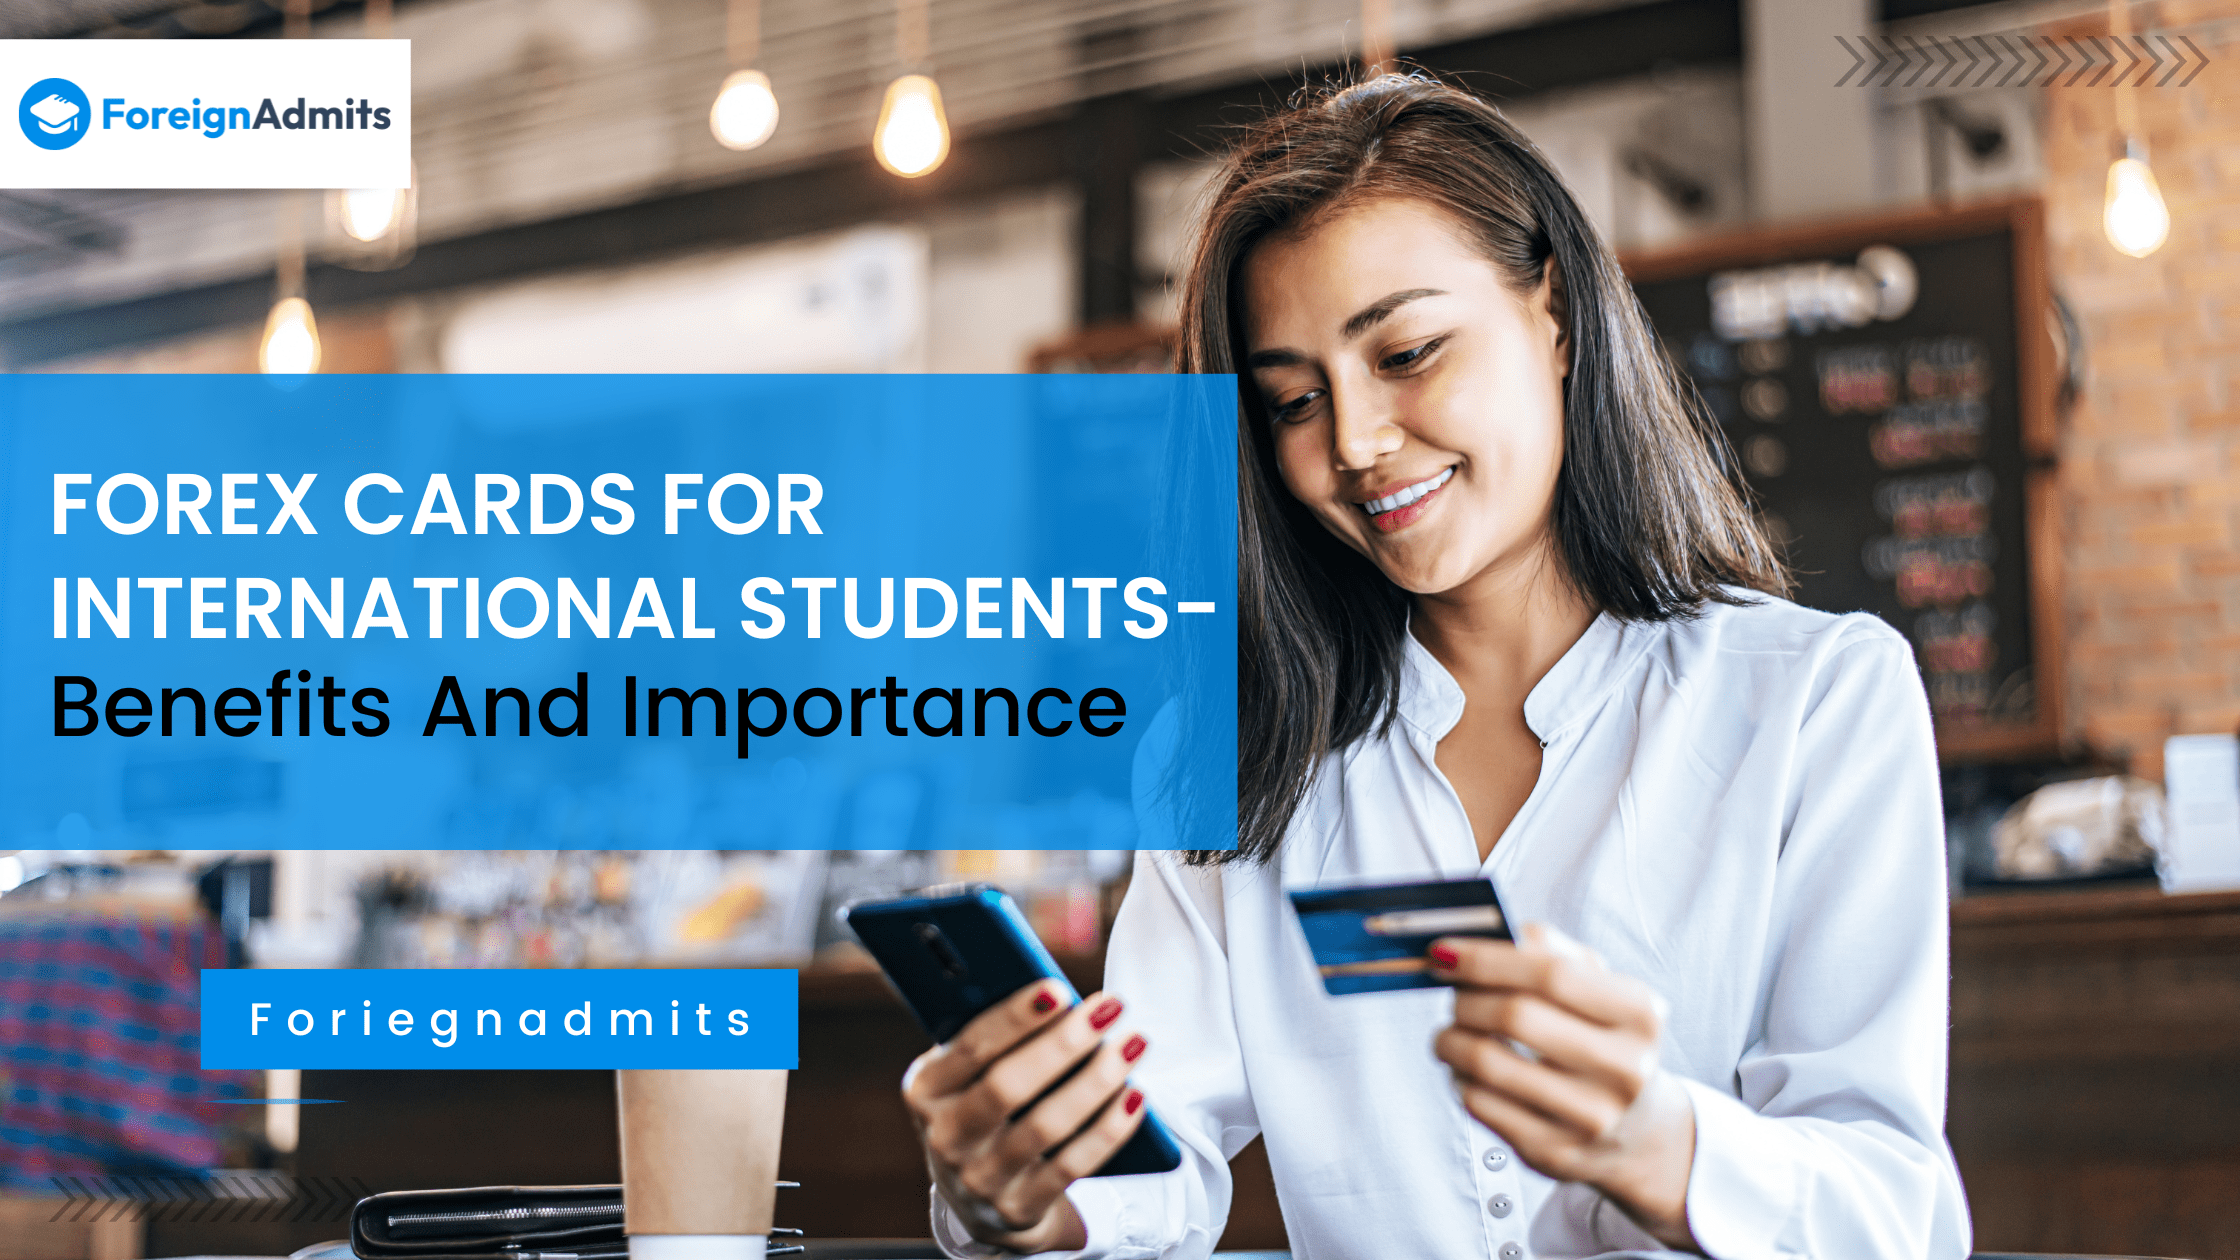 Best Benefits of Forex cards for International Students